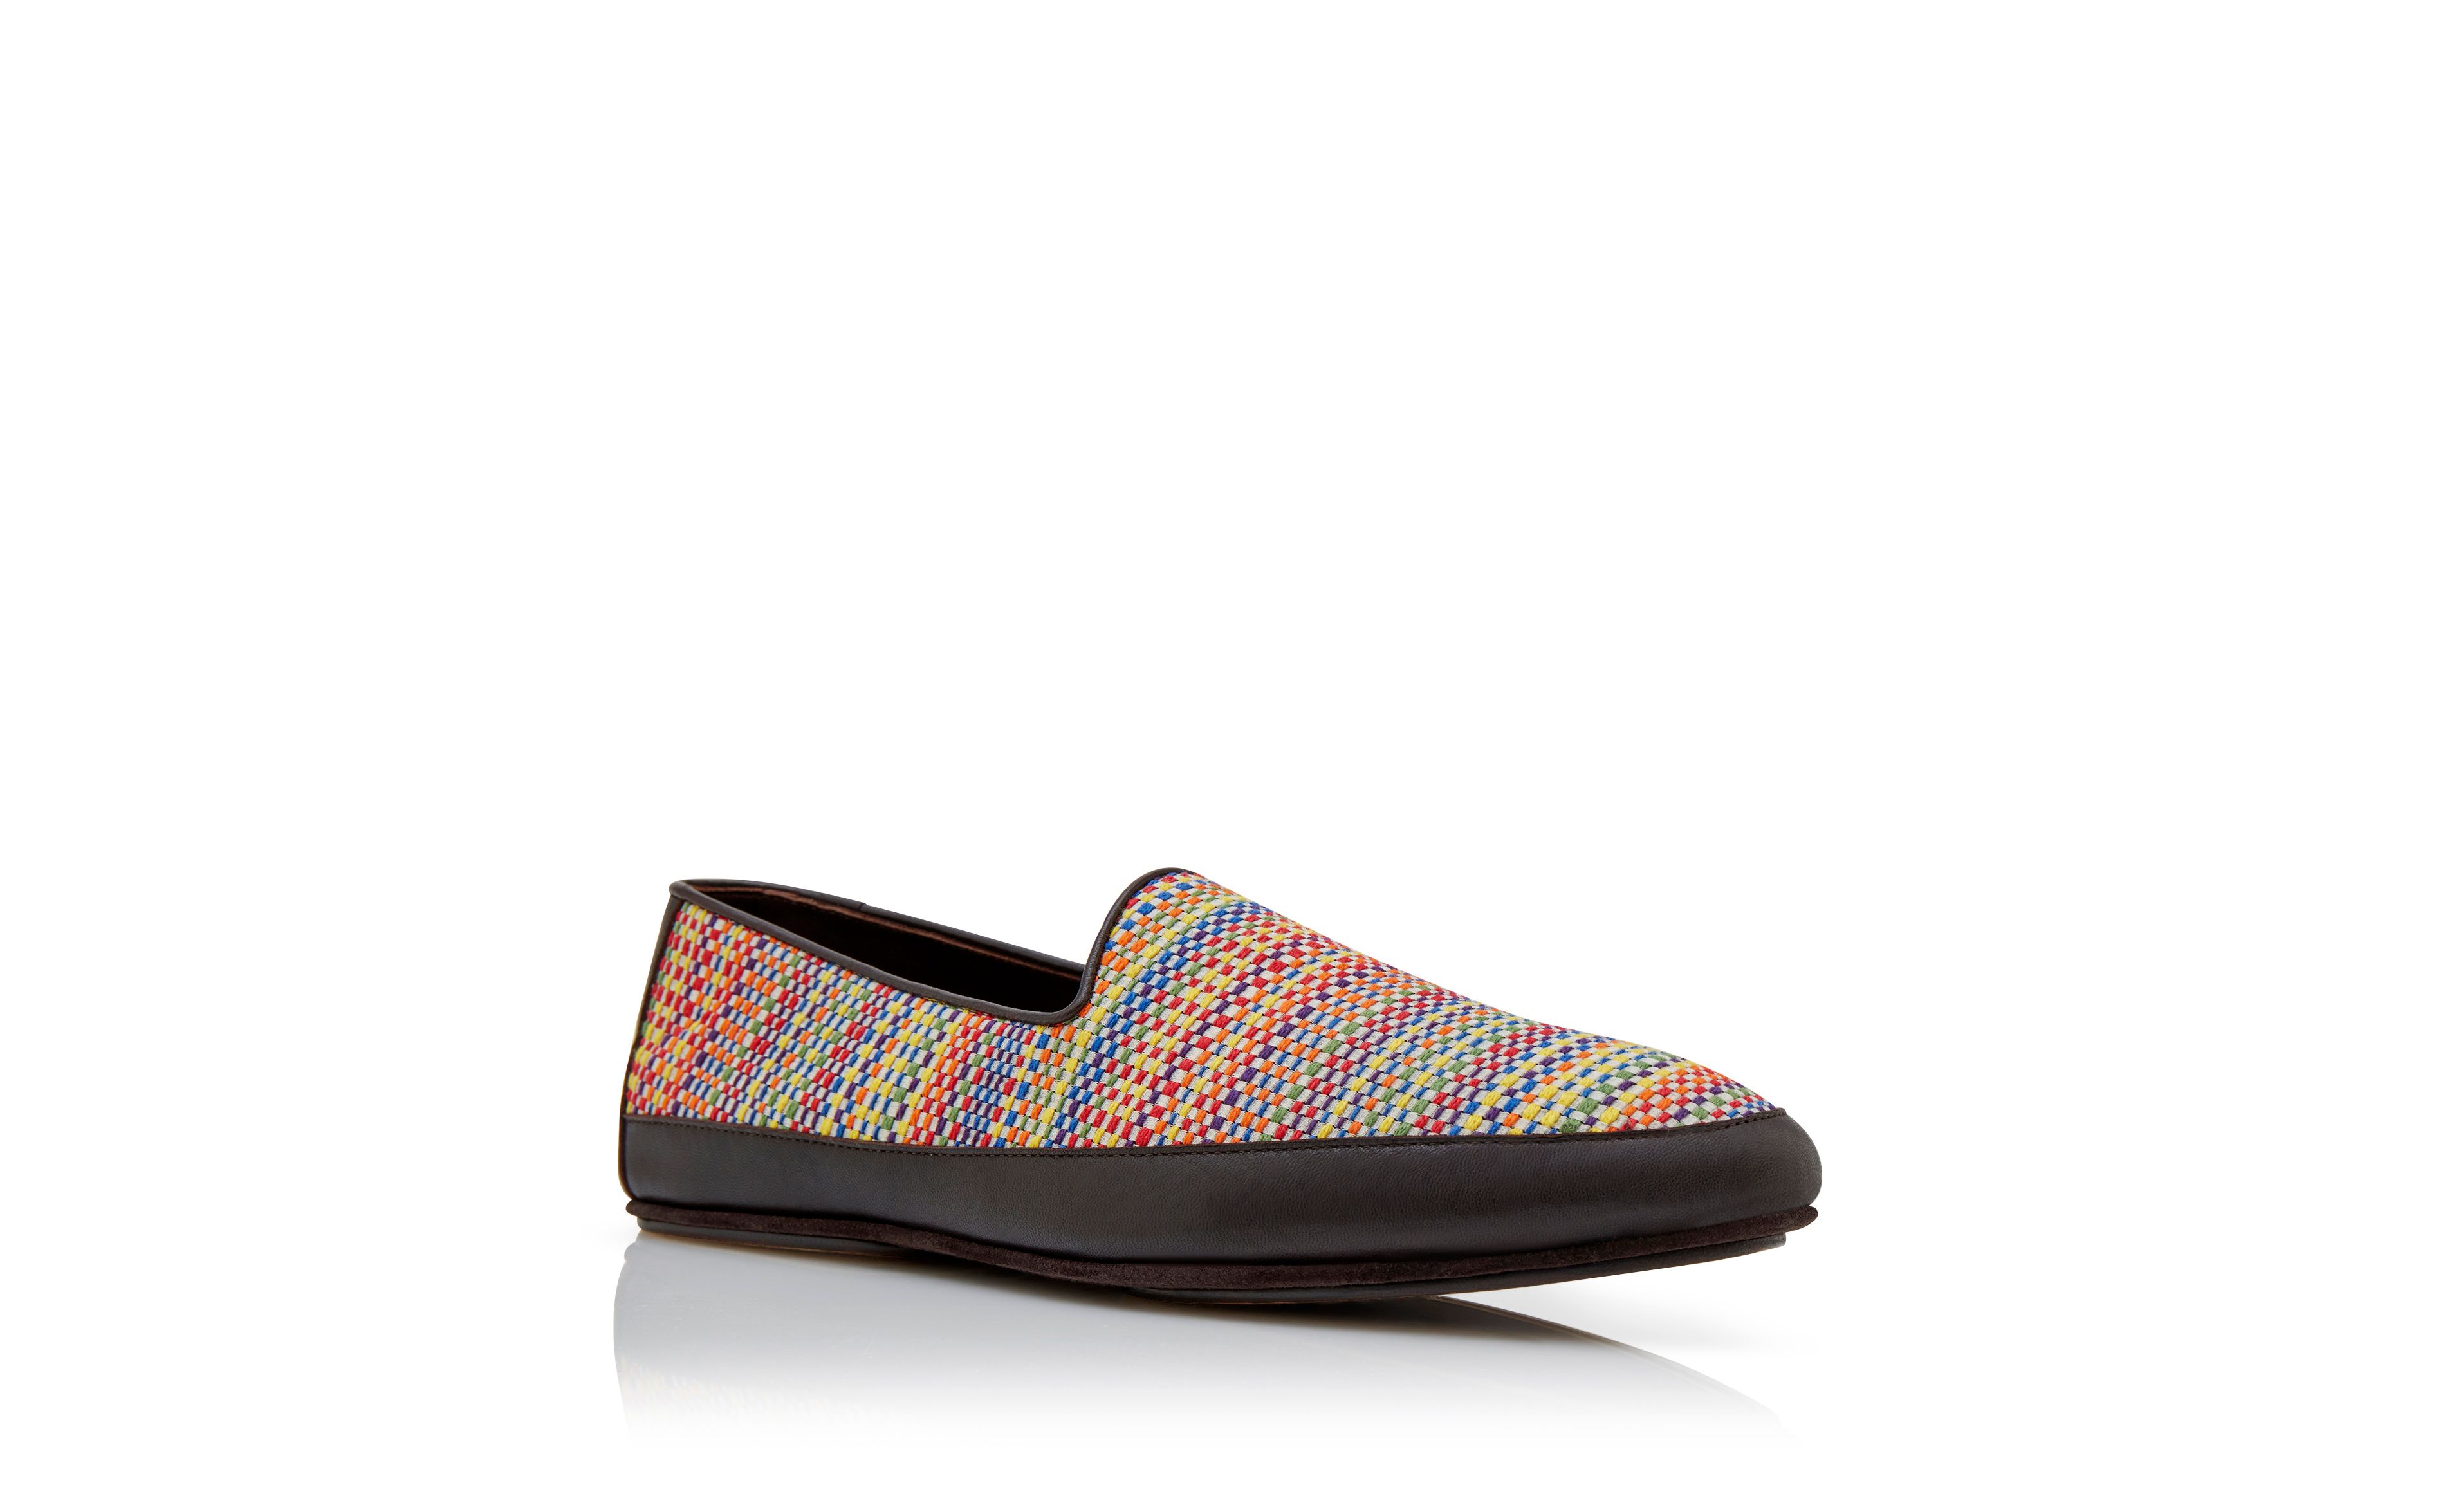 Designer Multicoloured Cotton Embroidered Slippers - Image Upsell